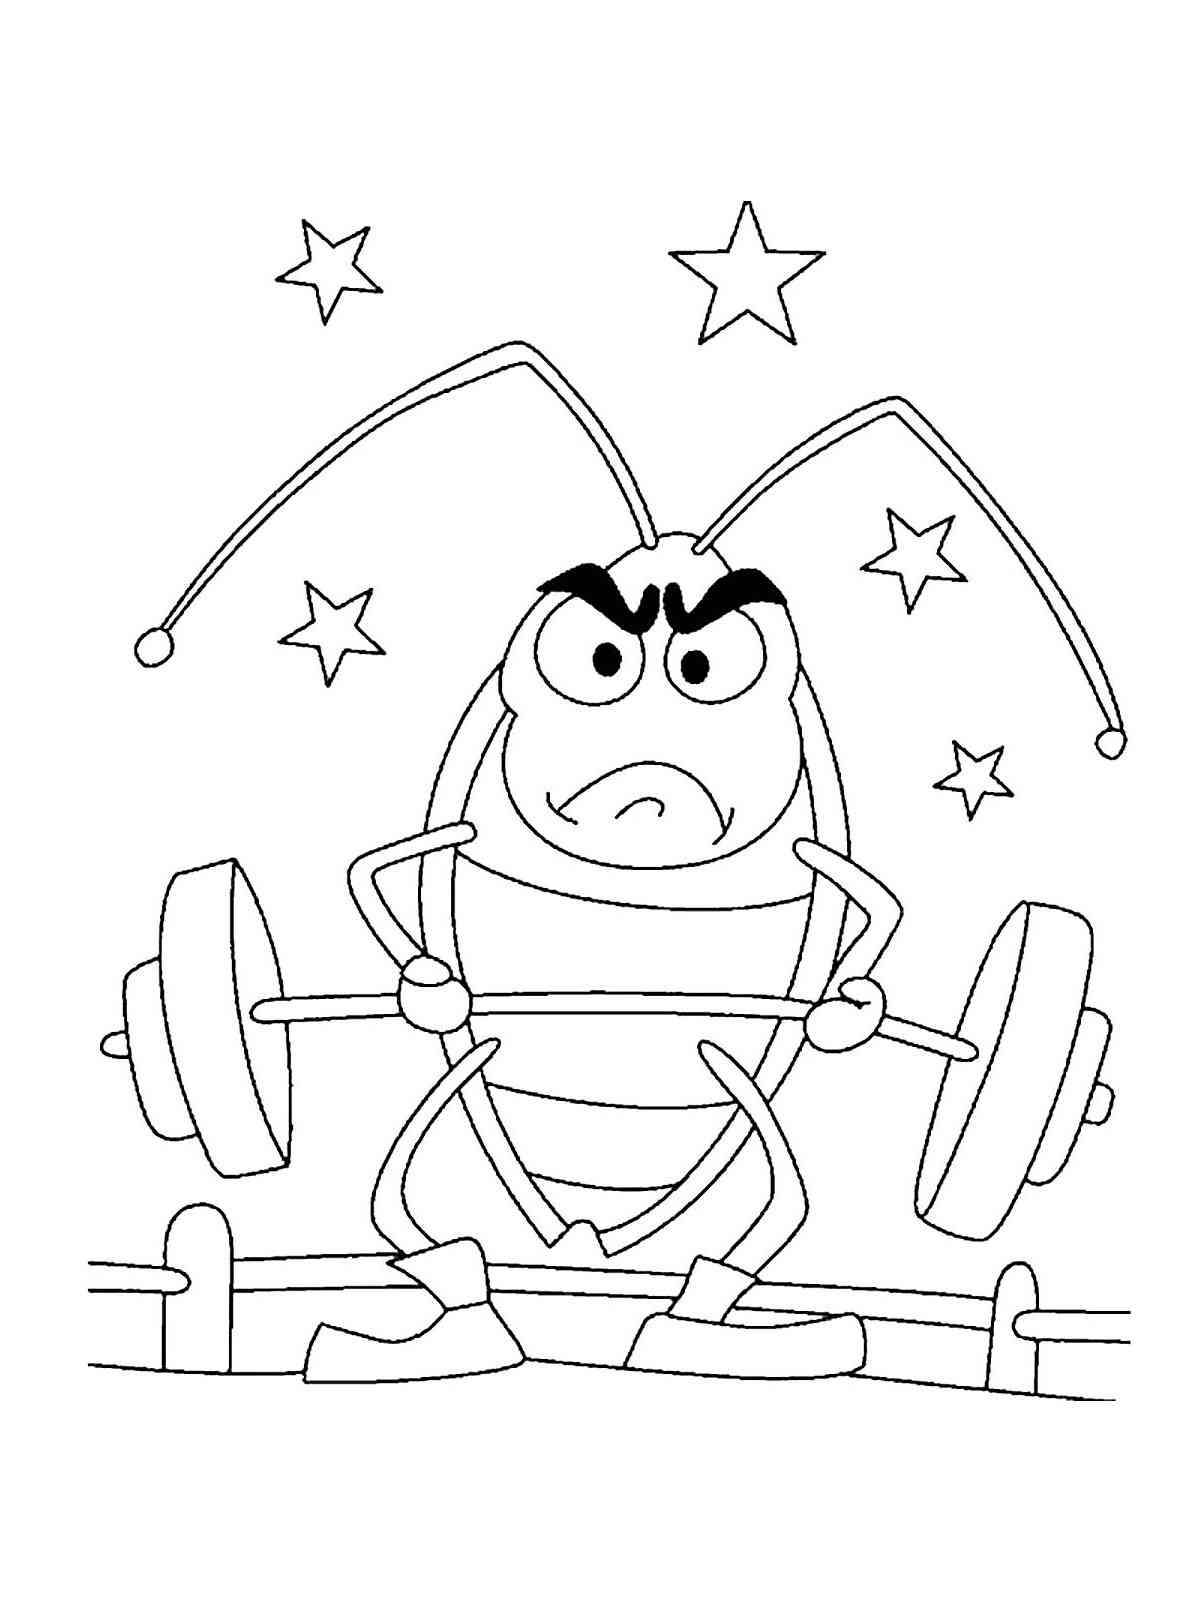 Weightlifter Cockroach coloring page